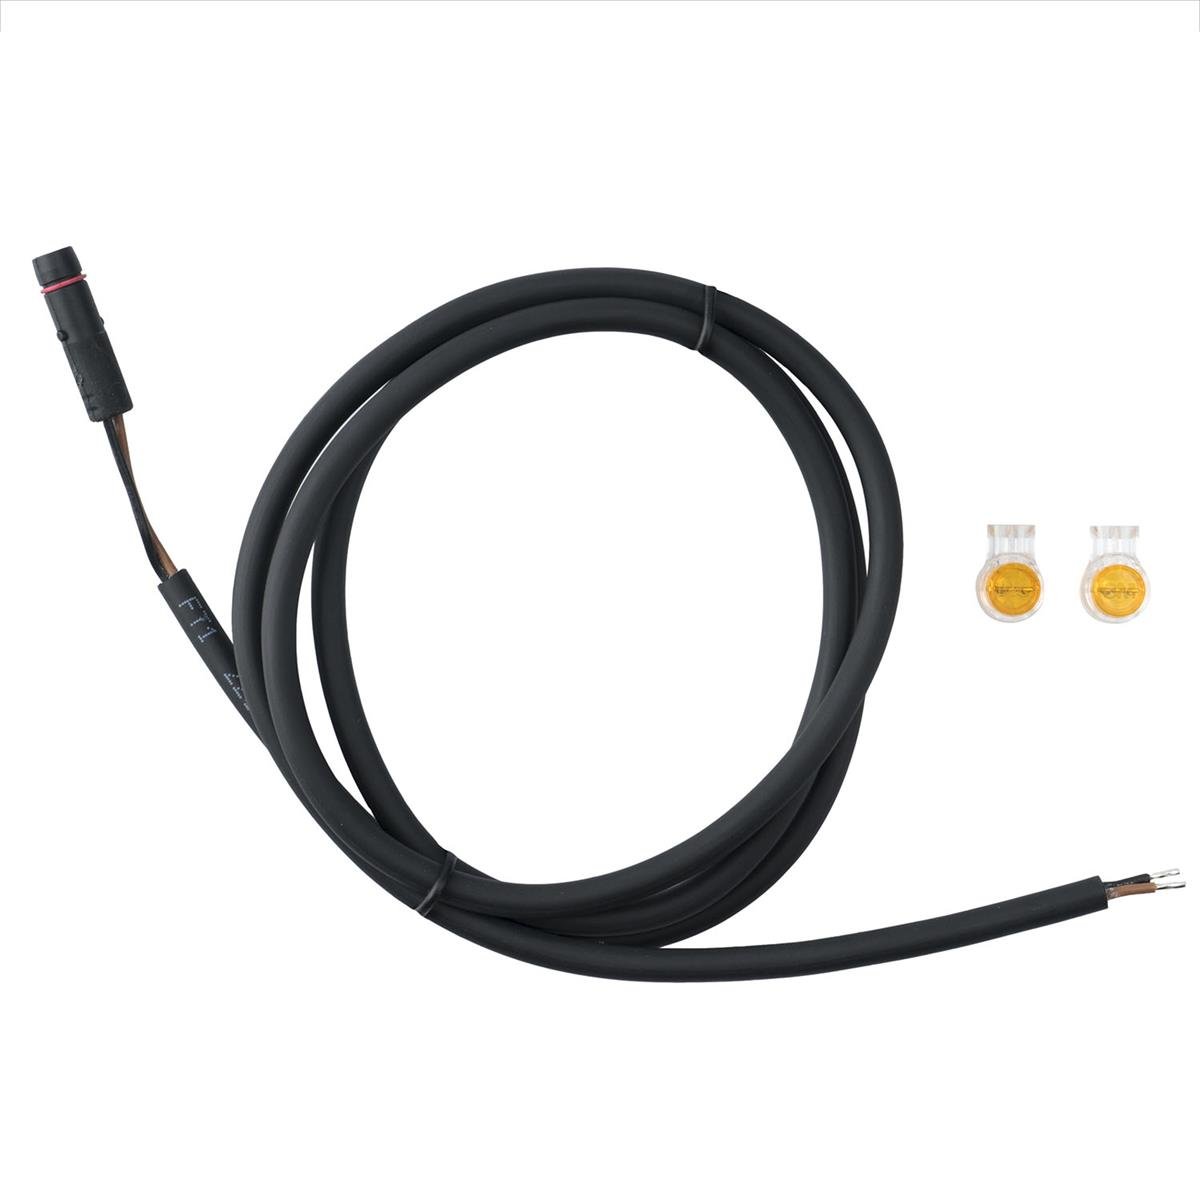 Supernova Taillight Connection Cable  for Brose